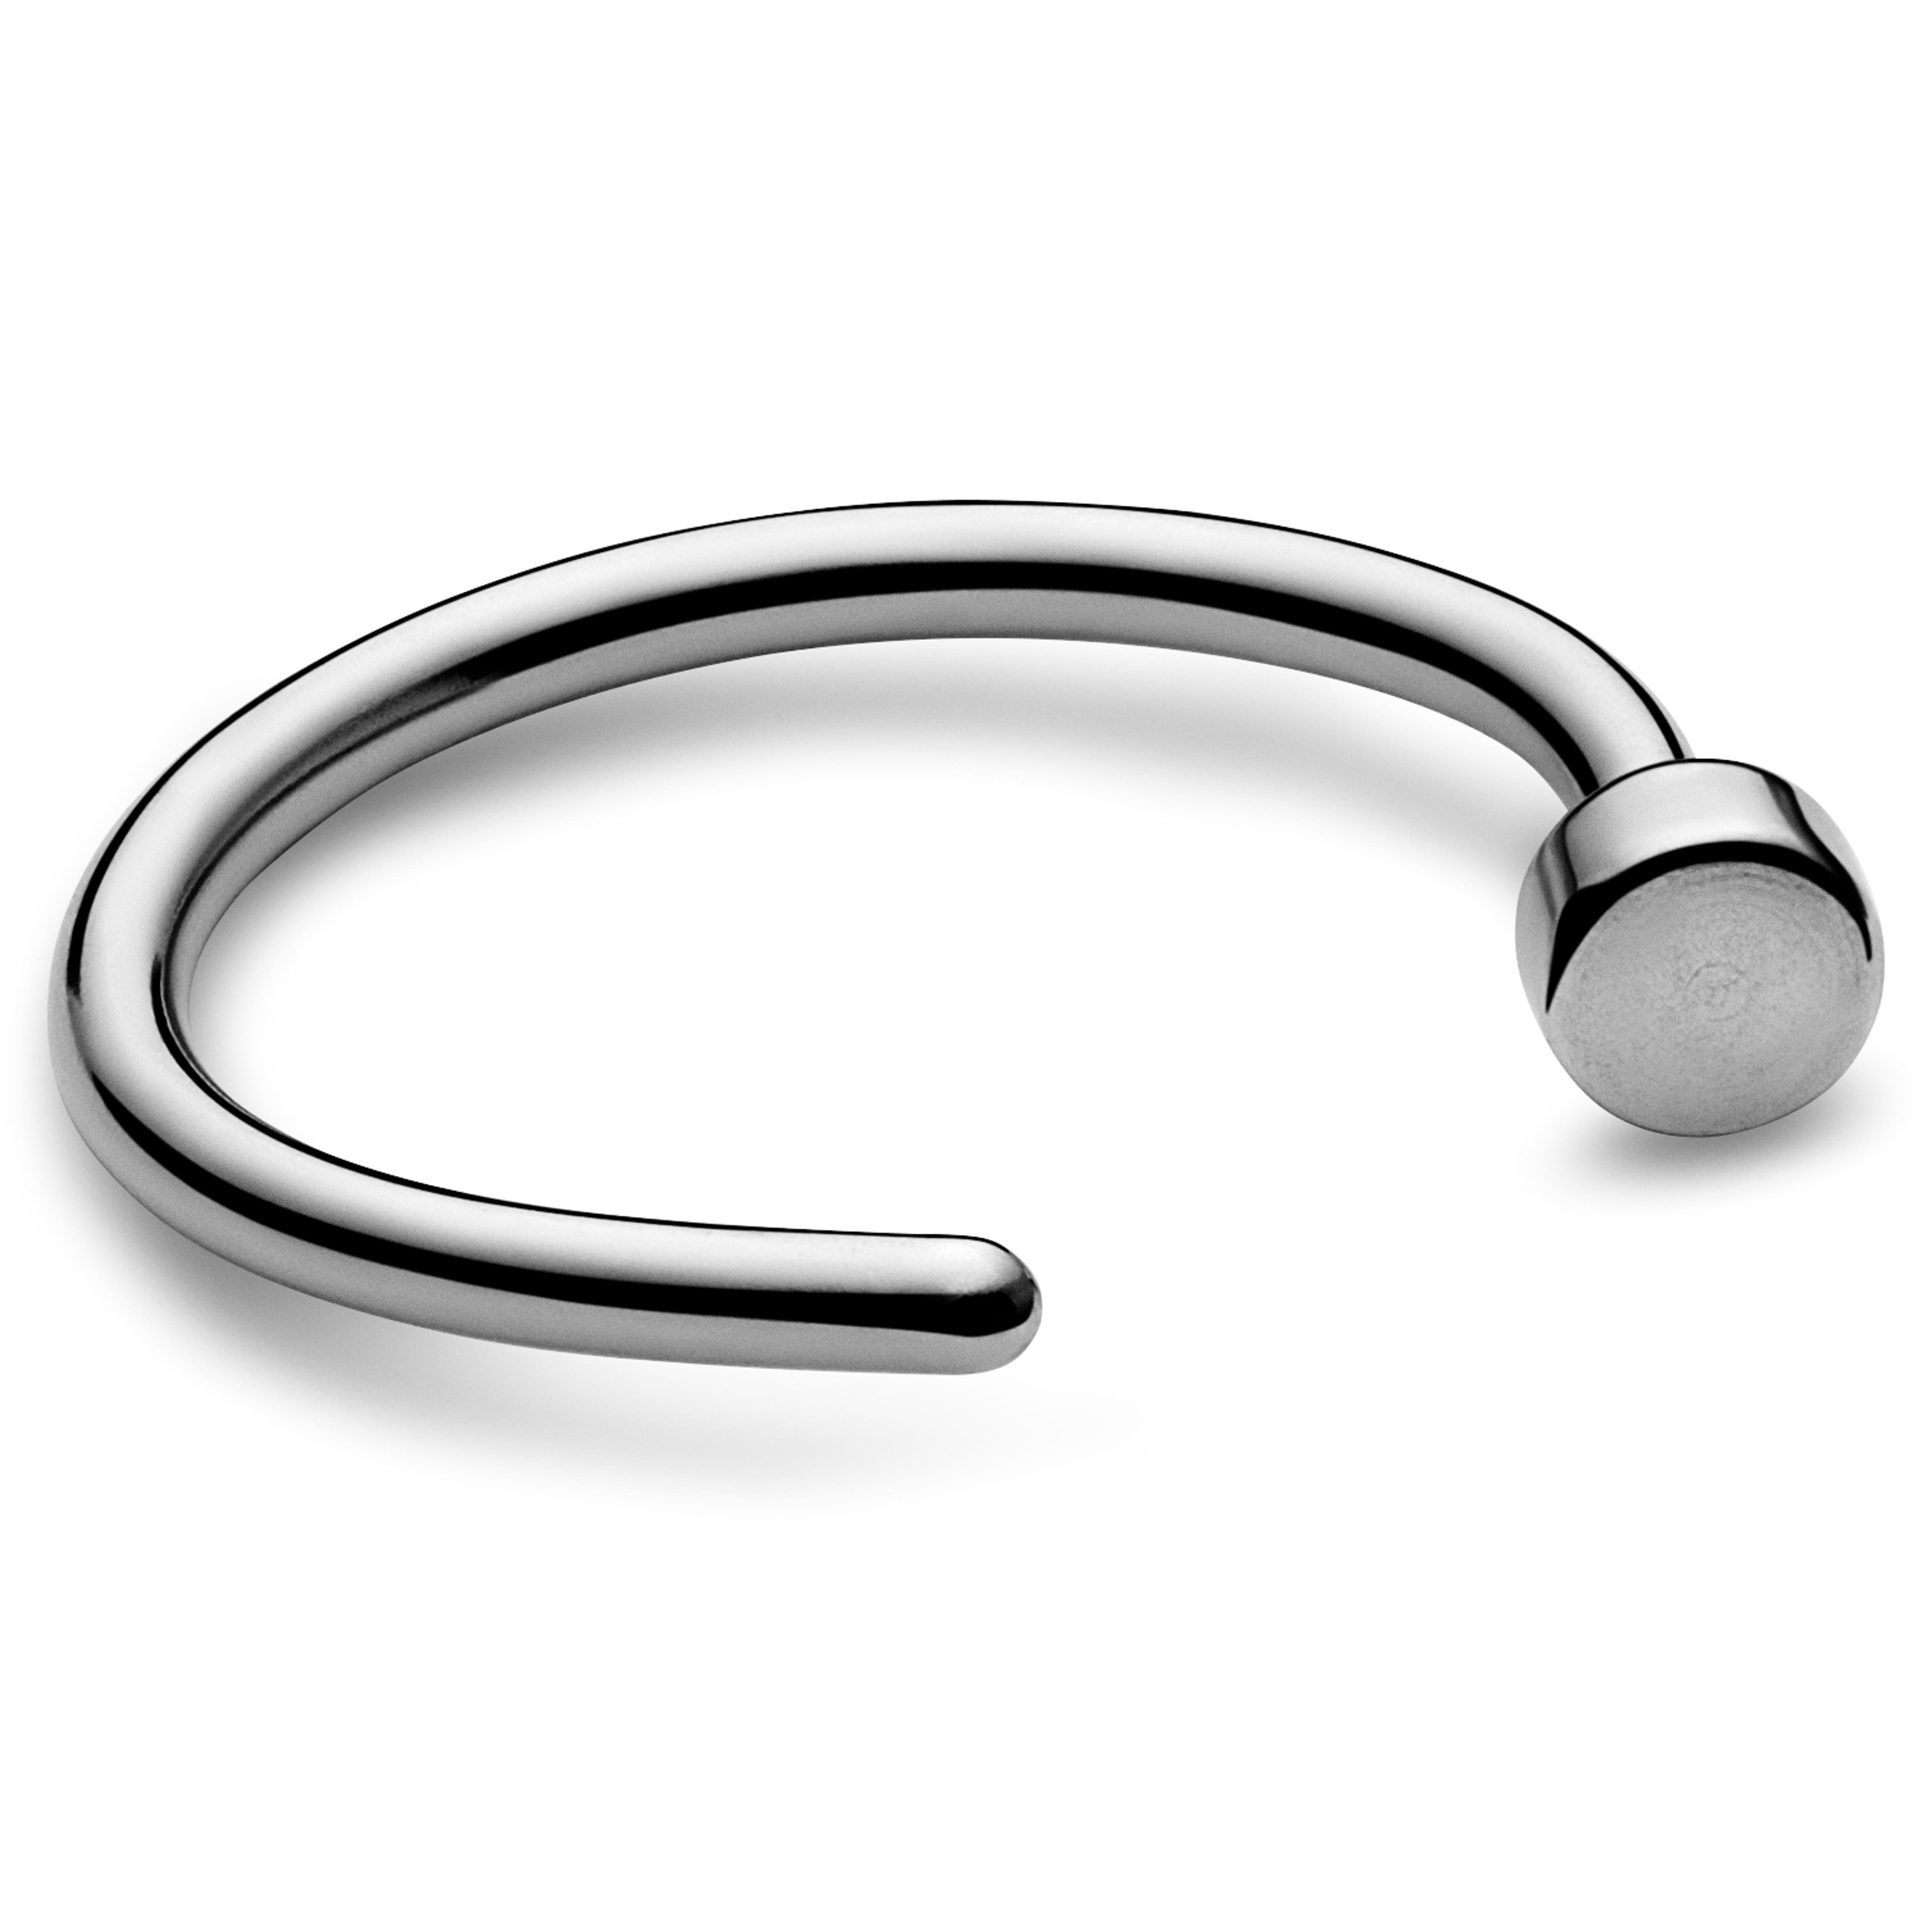 10 mm Open Silver-Tone Surgical Steel Nose Ring